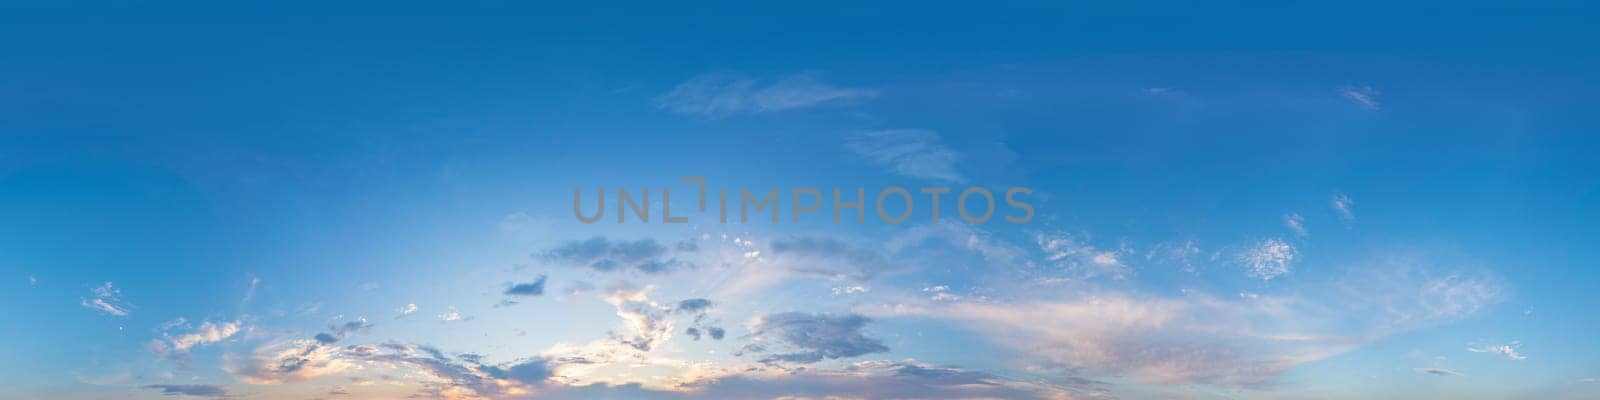 Dark blue sunset sky panorama with pink Cumulus clouds. Seamless hdr 360 panorama in spherical equirectangular format. Full zenith for 3D visualization, sky replacement for aerial drone panoramas. by panophotograph